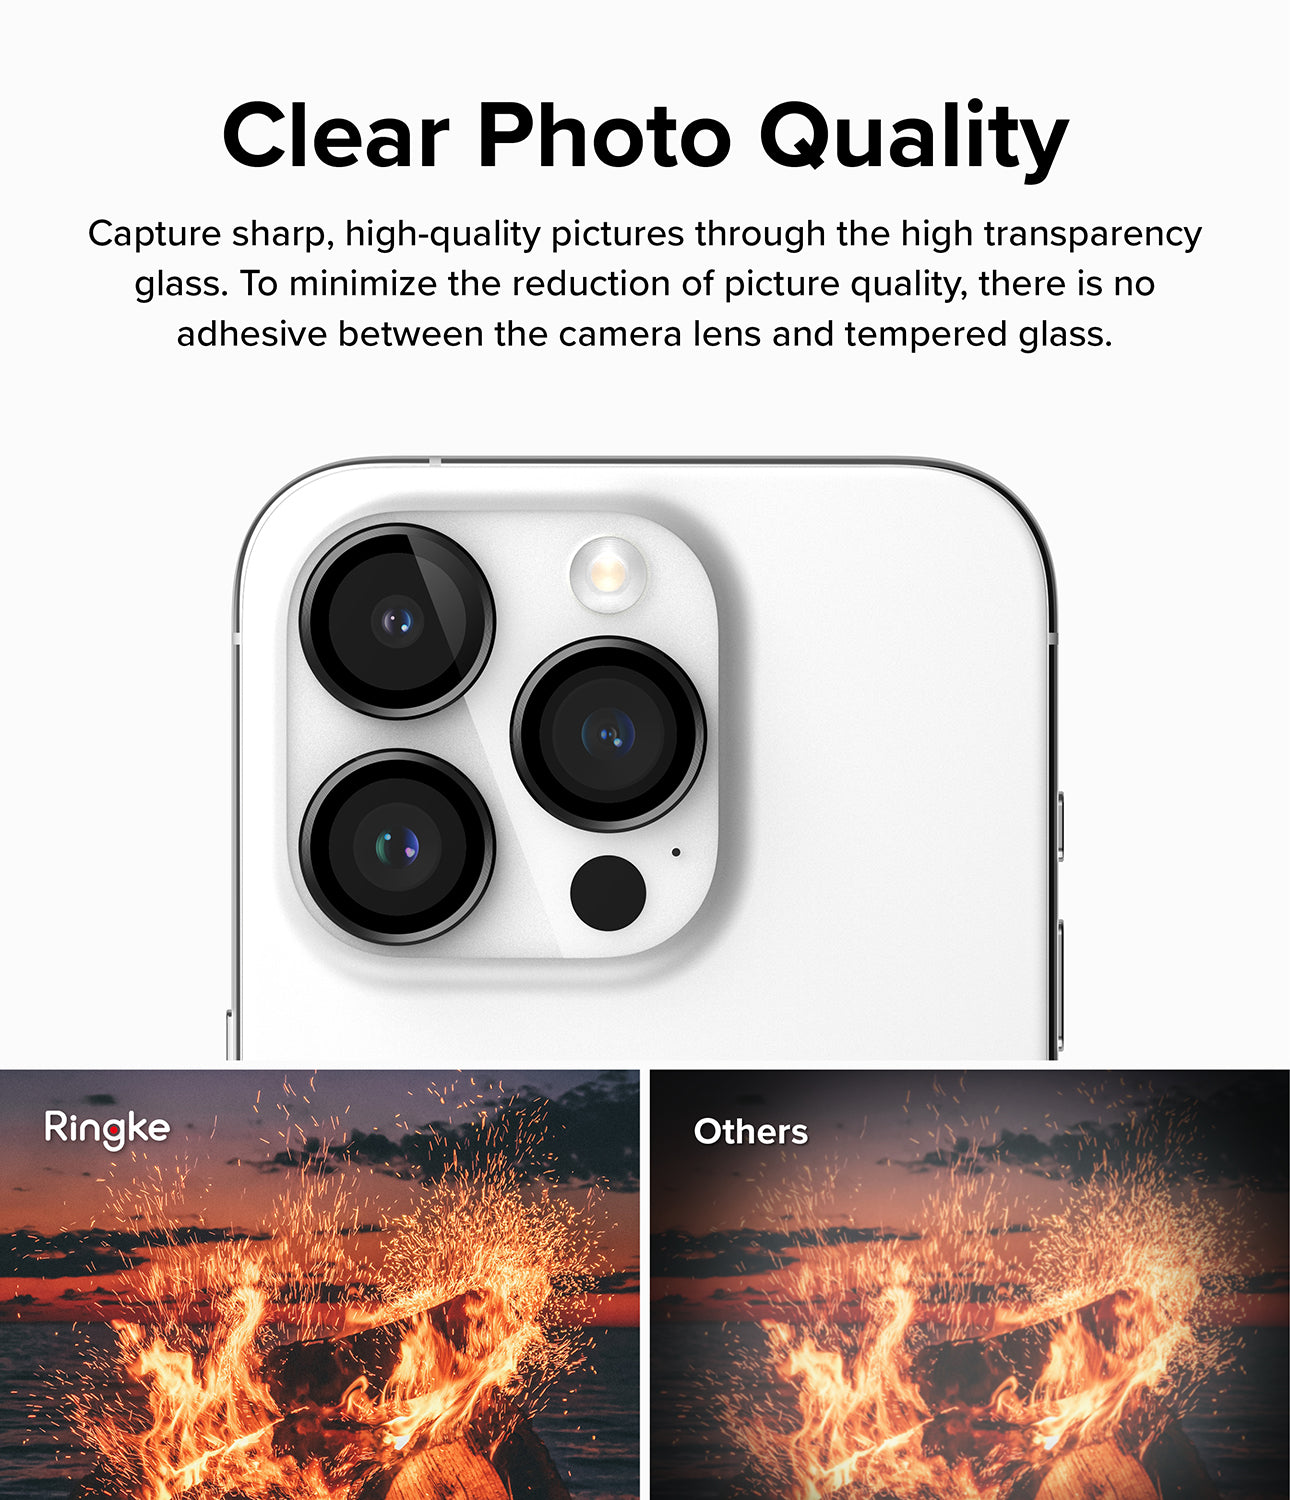 iPhone 15 Pro Max | Camera Lens Frame Glass - Clear Photo Quality. Capture sharp, high-quality pictures through the high transparency glass. To minimize the reduction of picture quality, there is no adhesive between the camera lens and tempered glass.